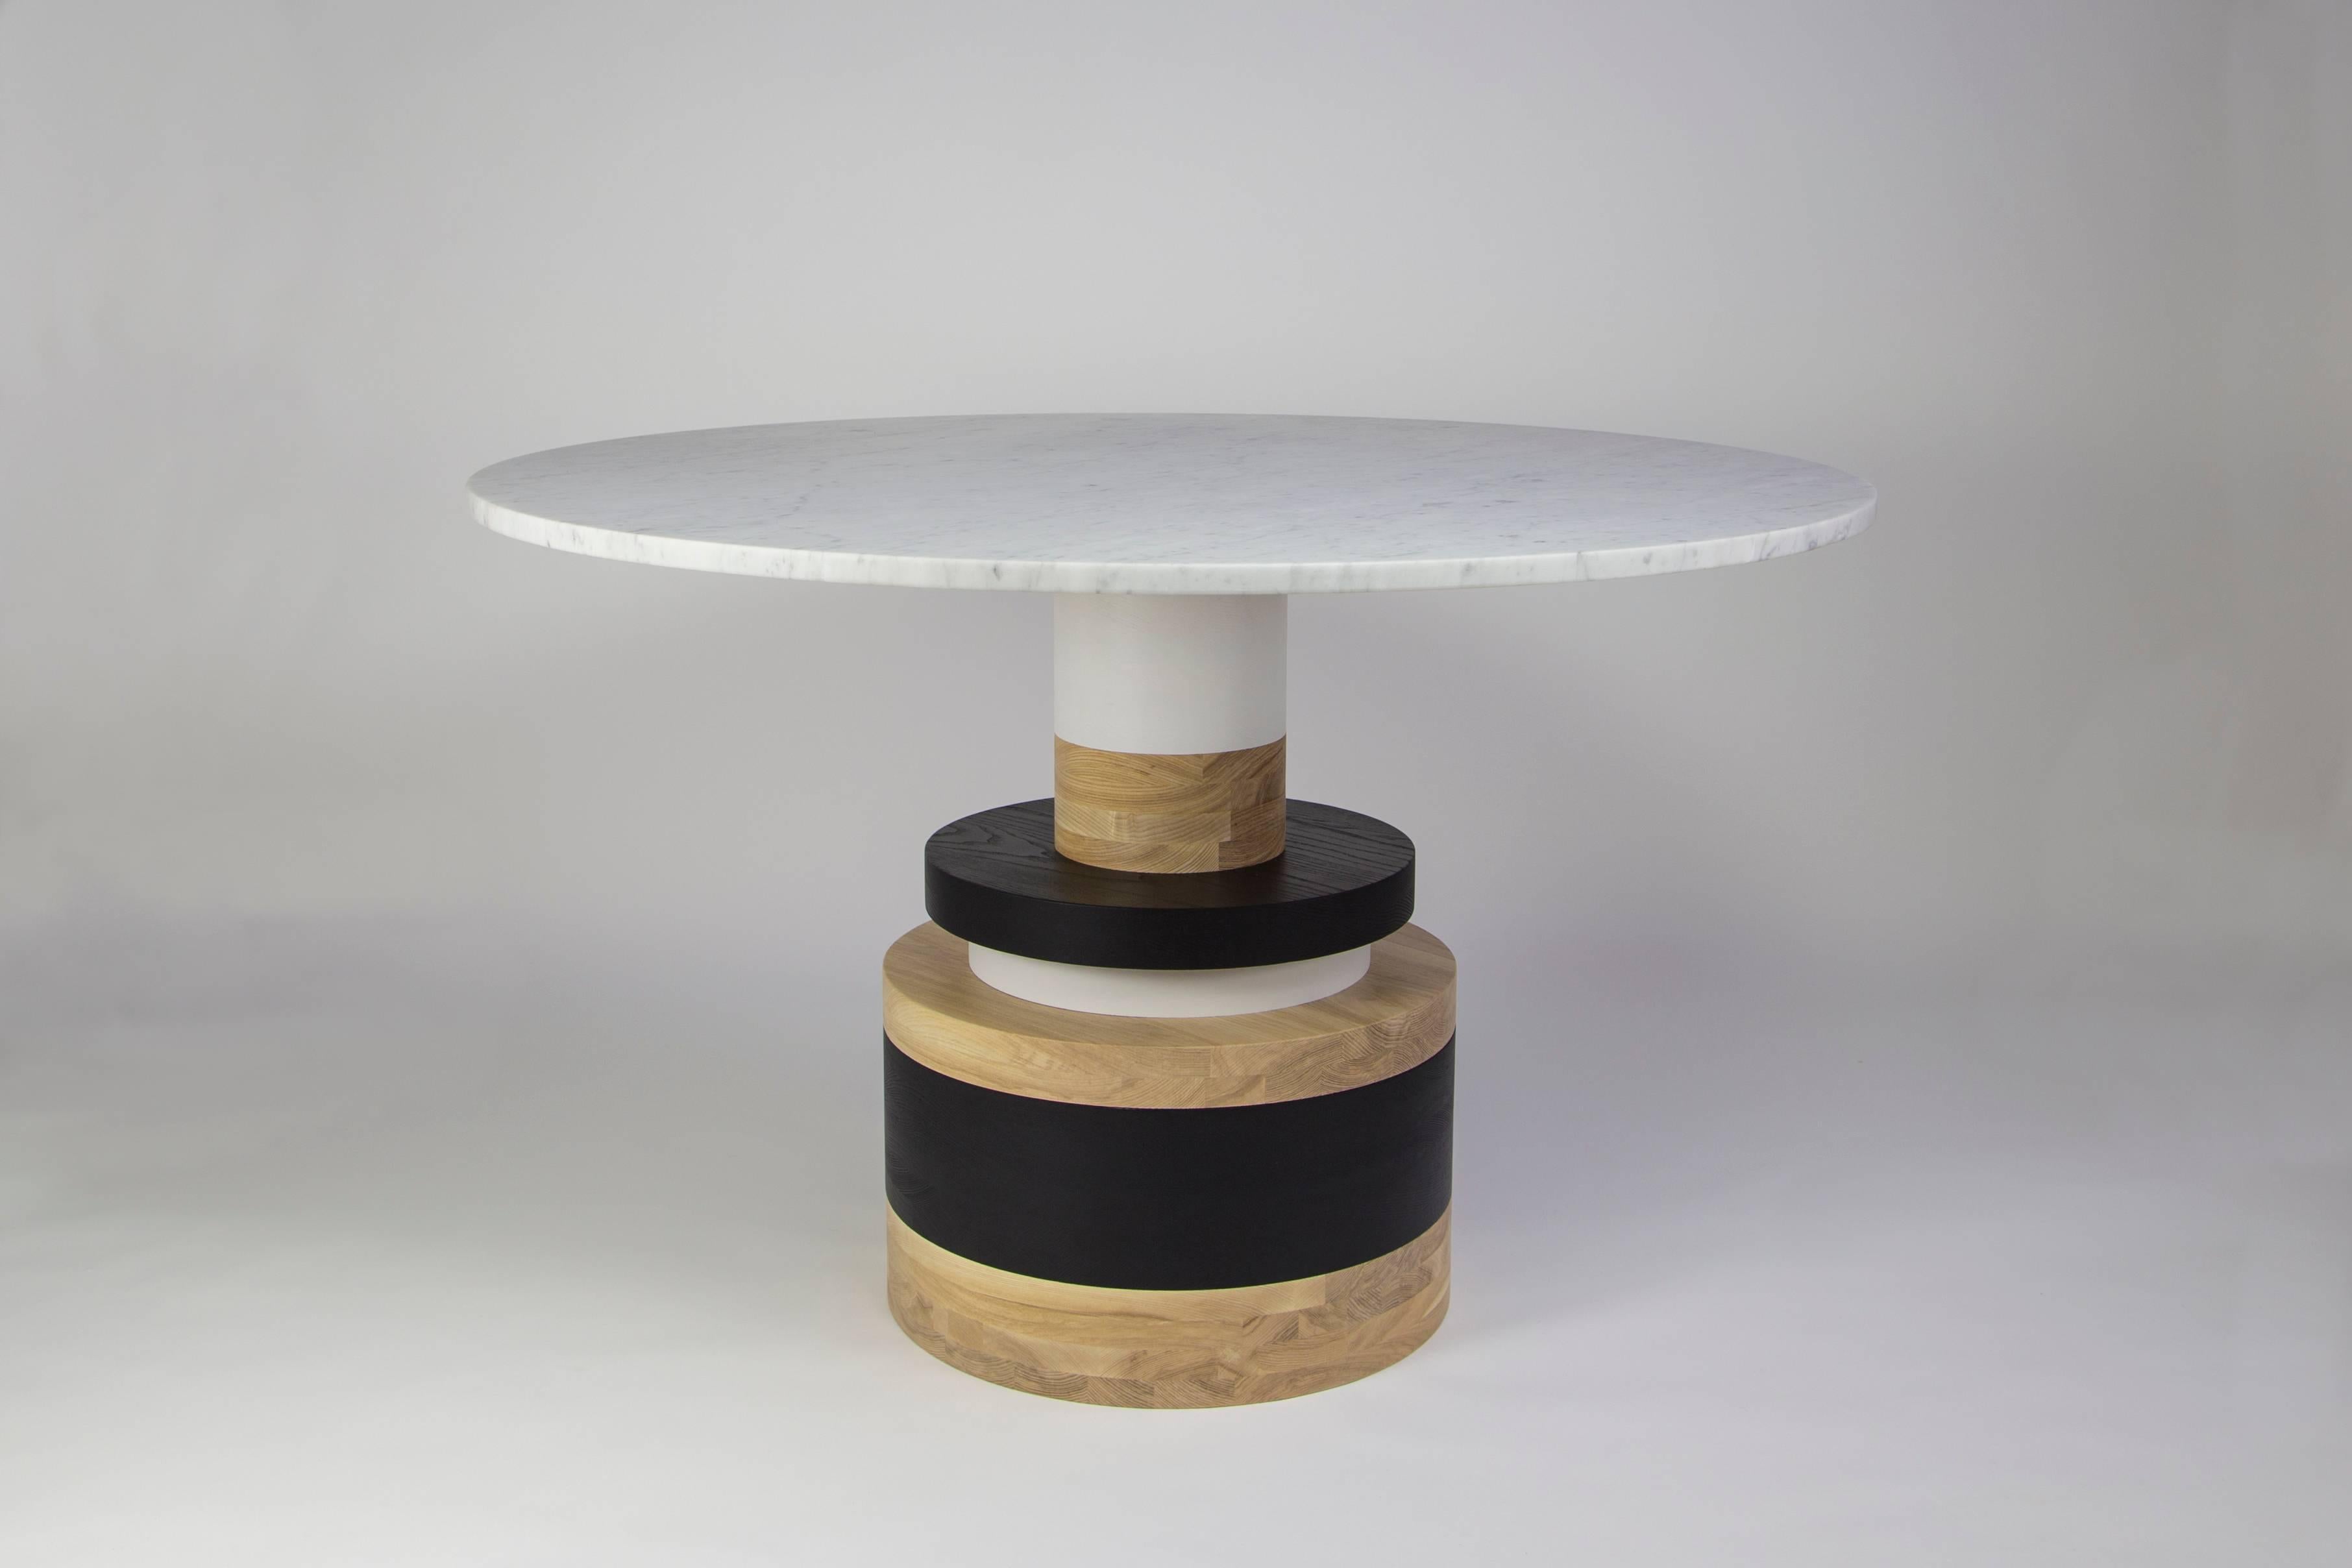 The Sottsass-inspired “Sass Dining Table” is a bold, graphic statement piece. A honed Carrara marble top sits on an Amish-made base composed of painted and stacked wood circles. 

The version as shown is 42